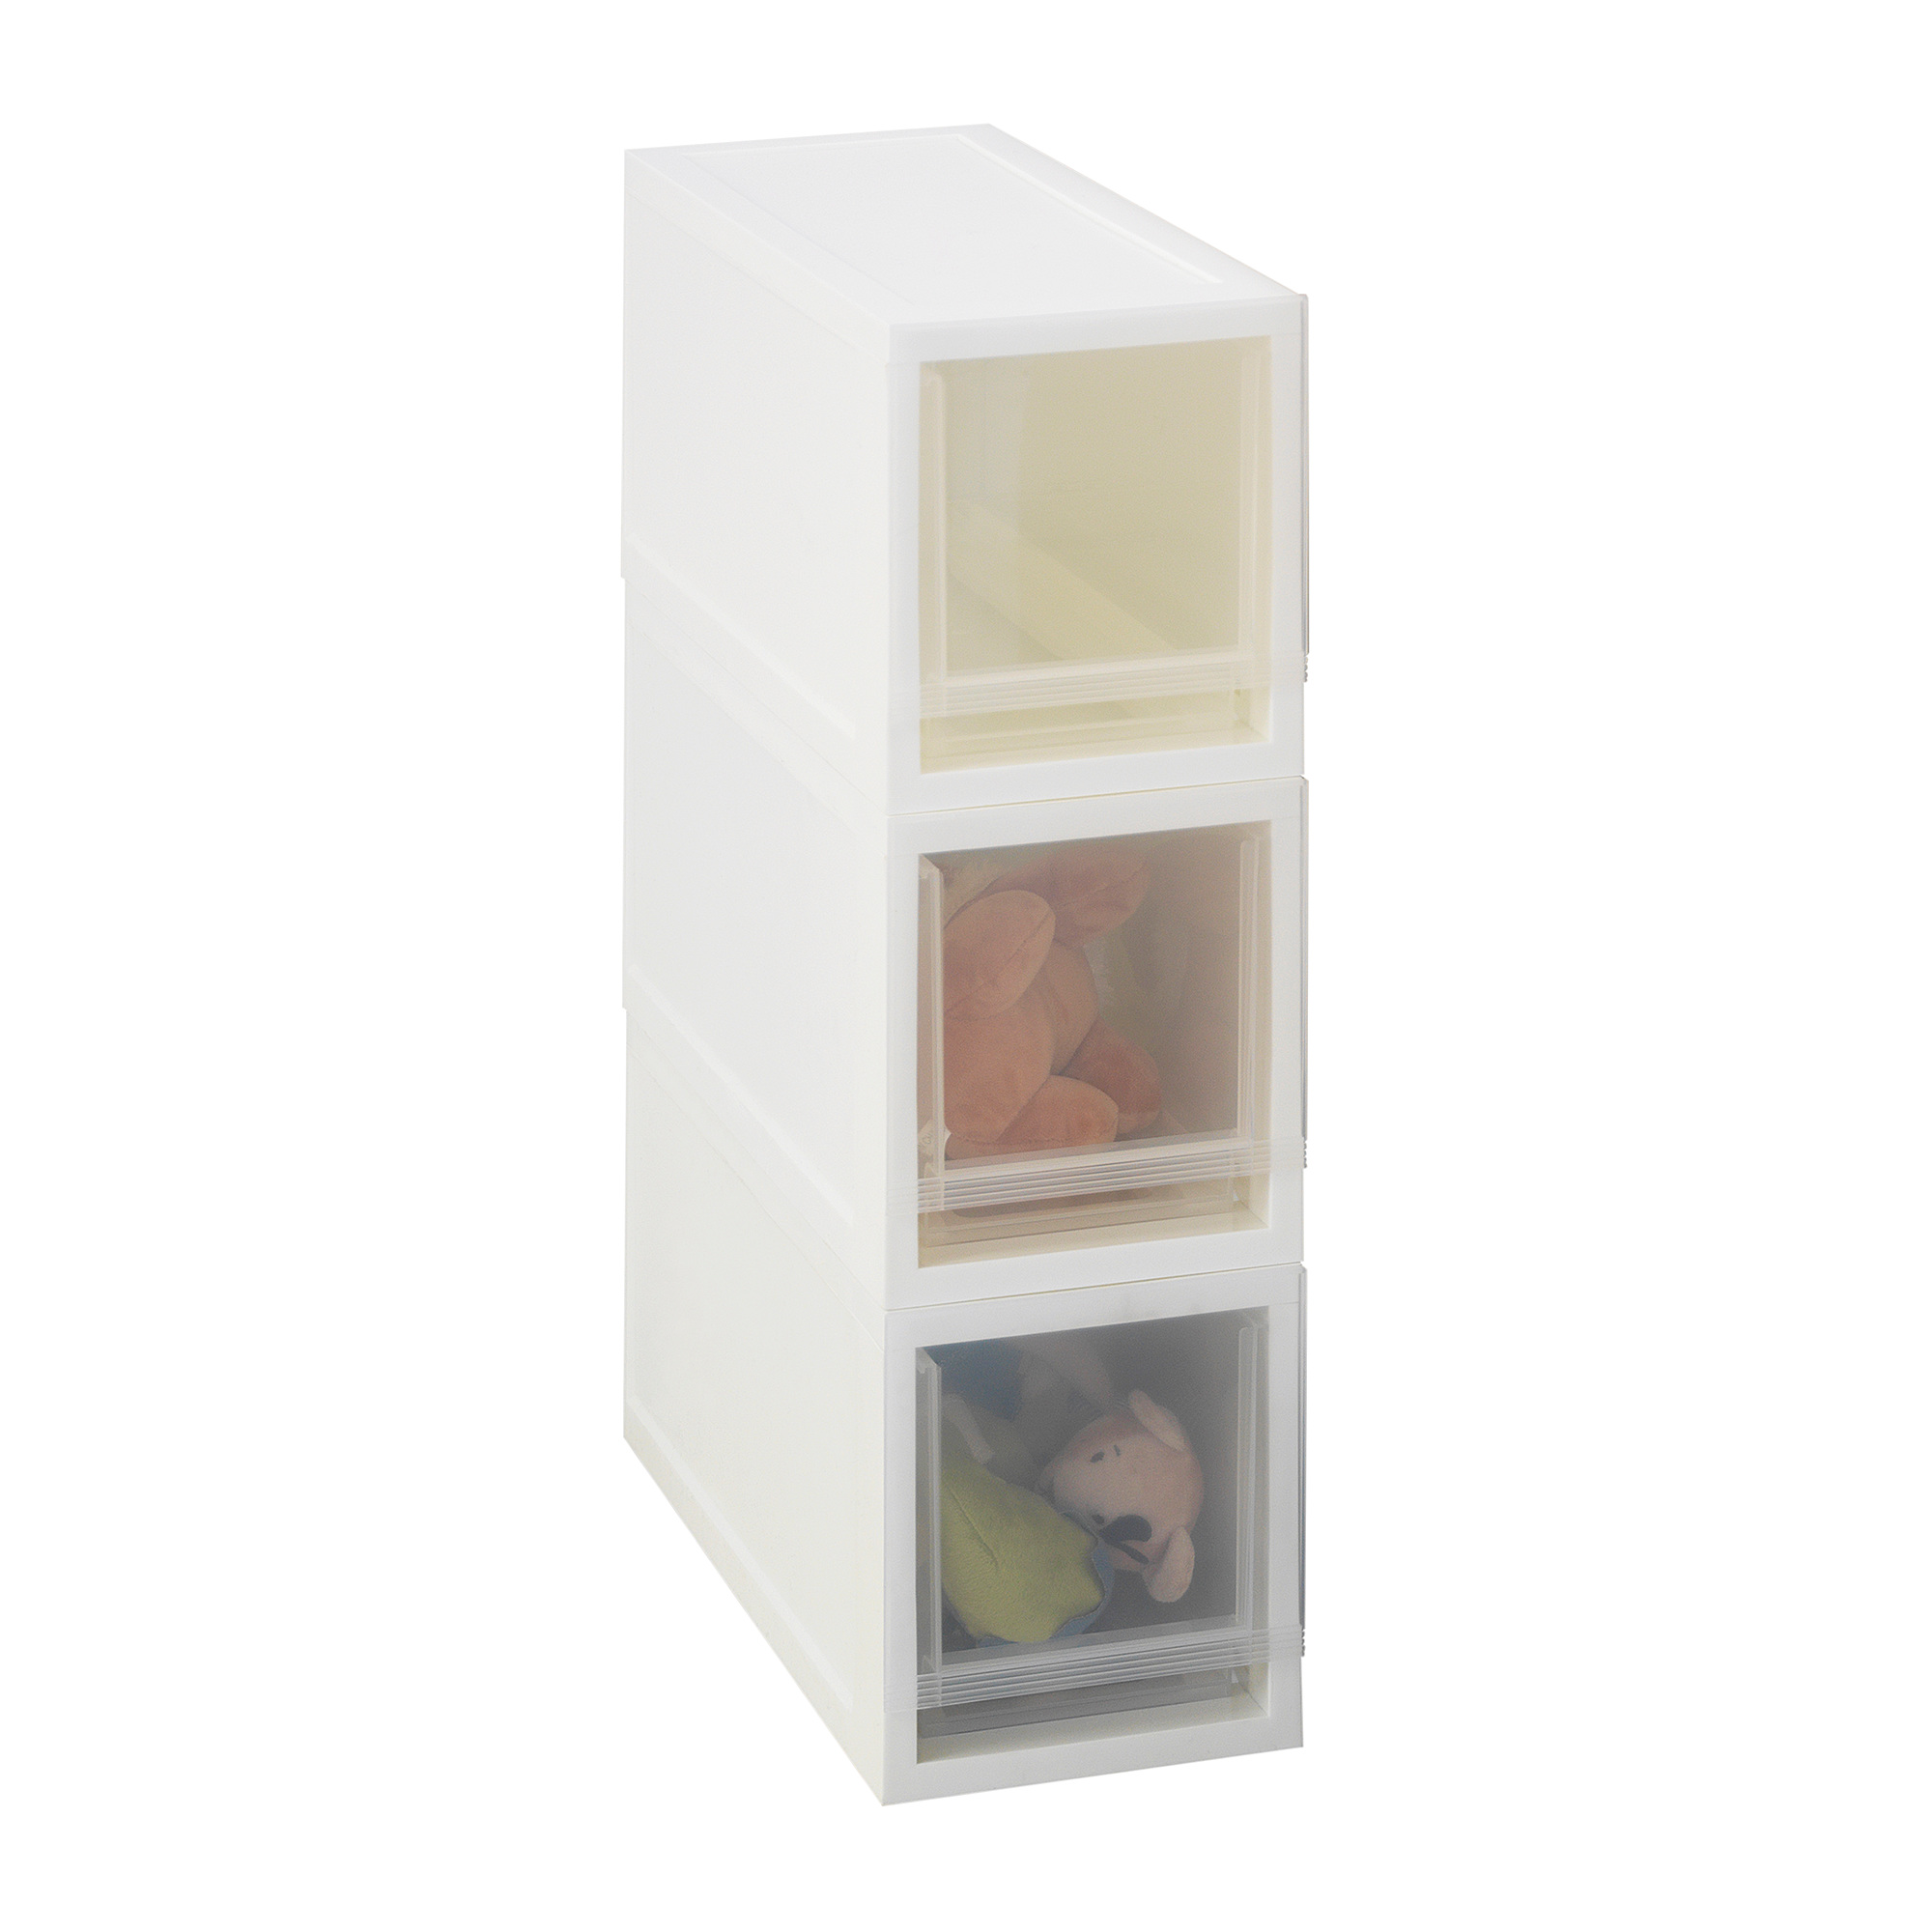 SOPPROT pull-out storage unit